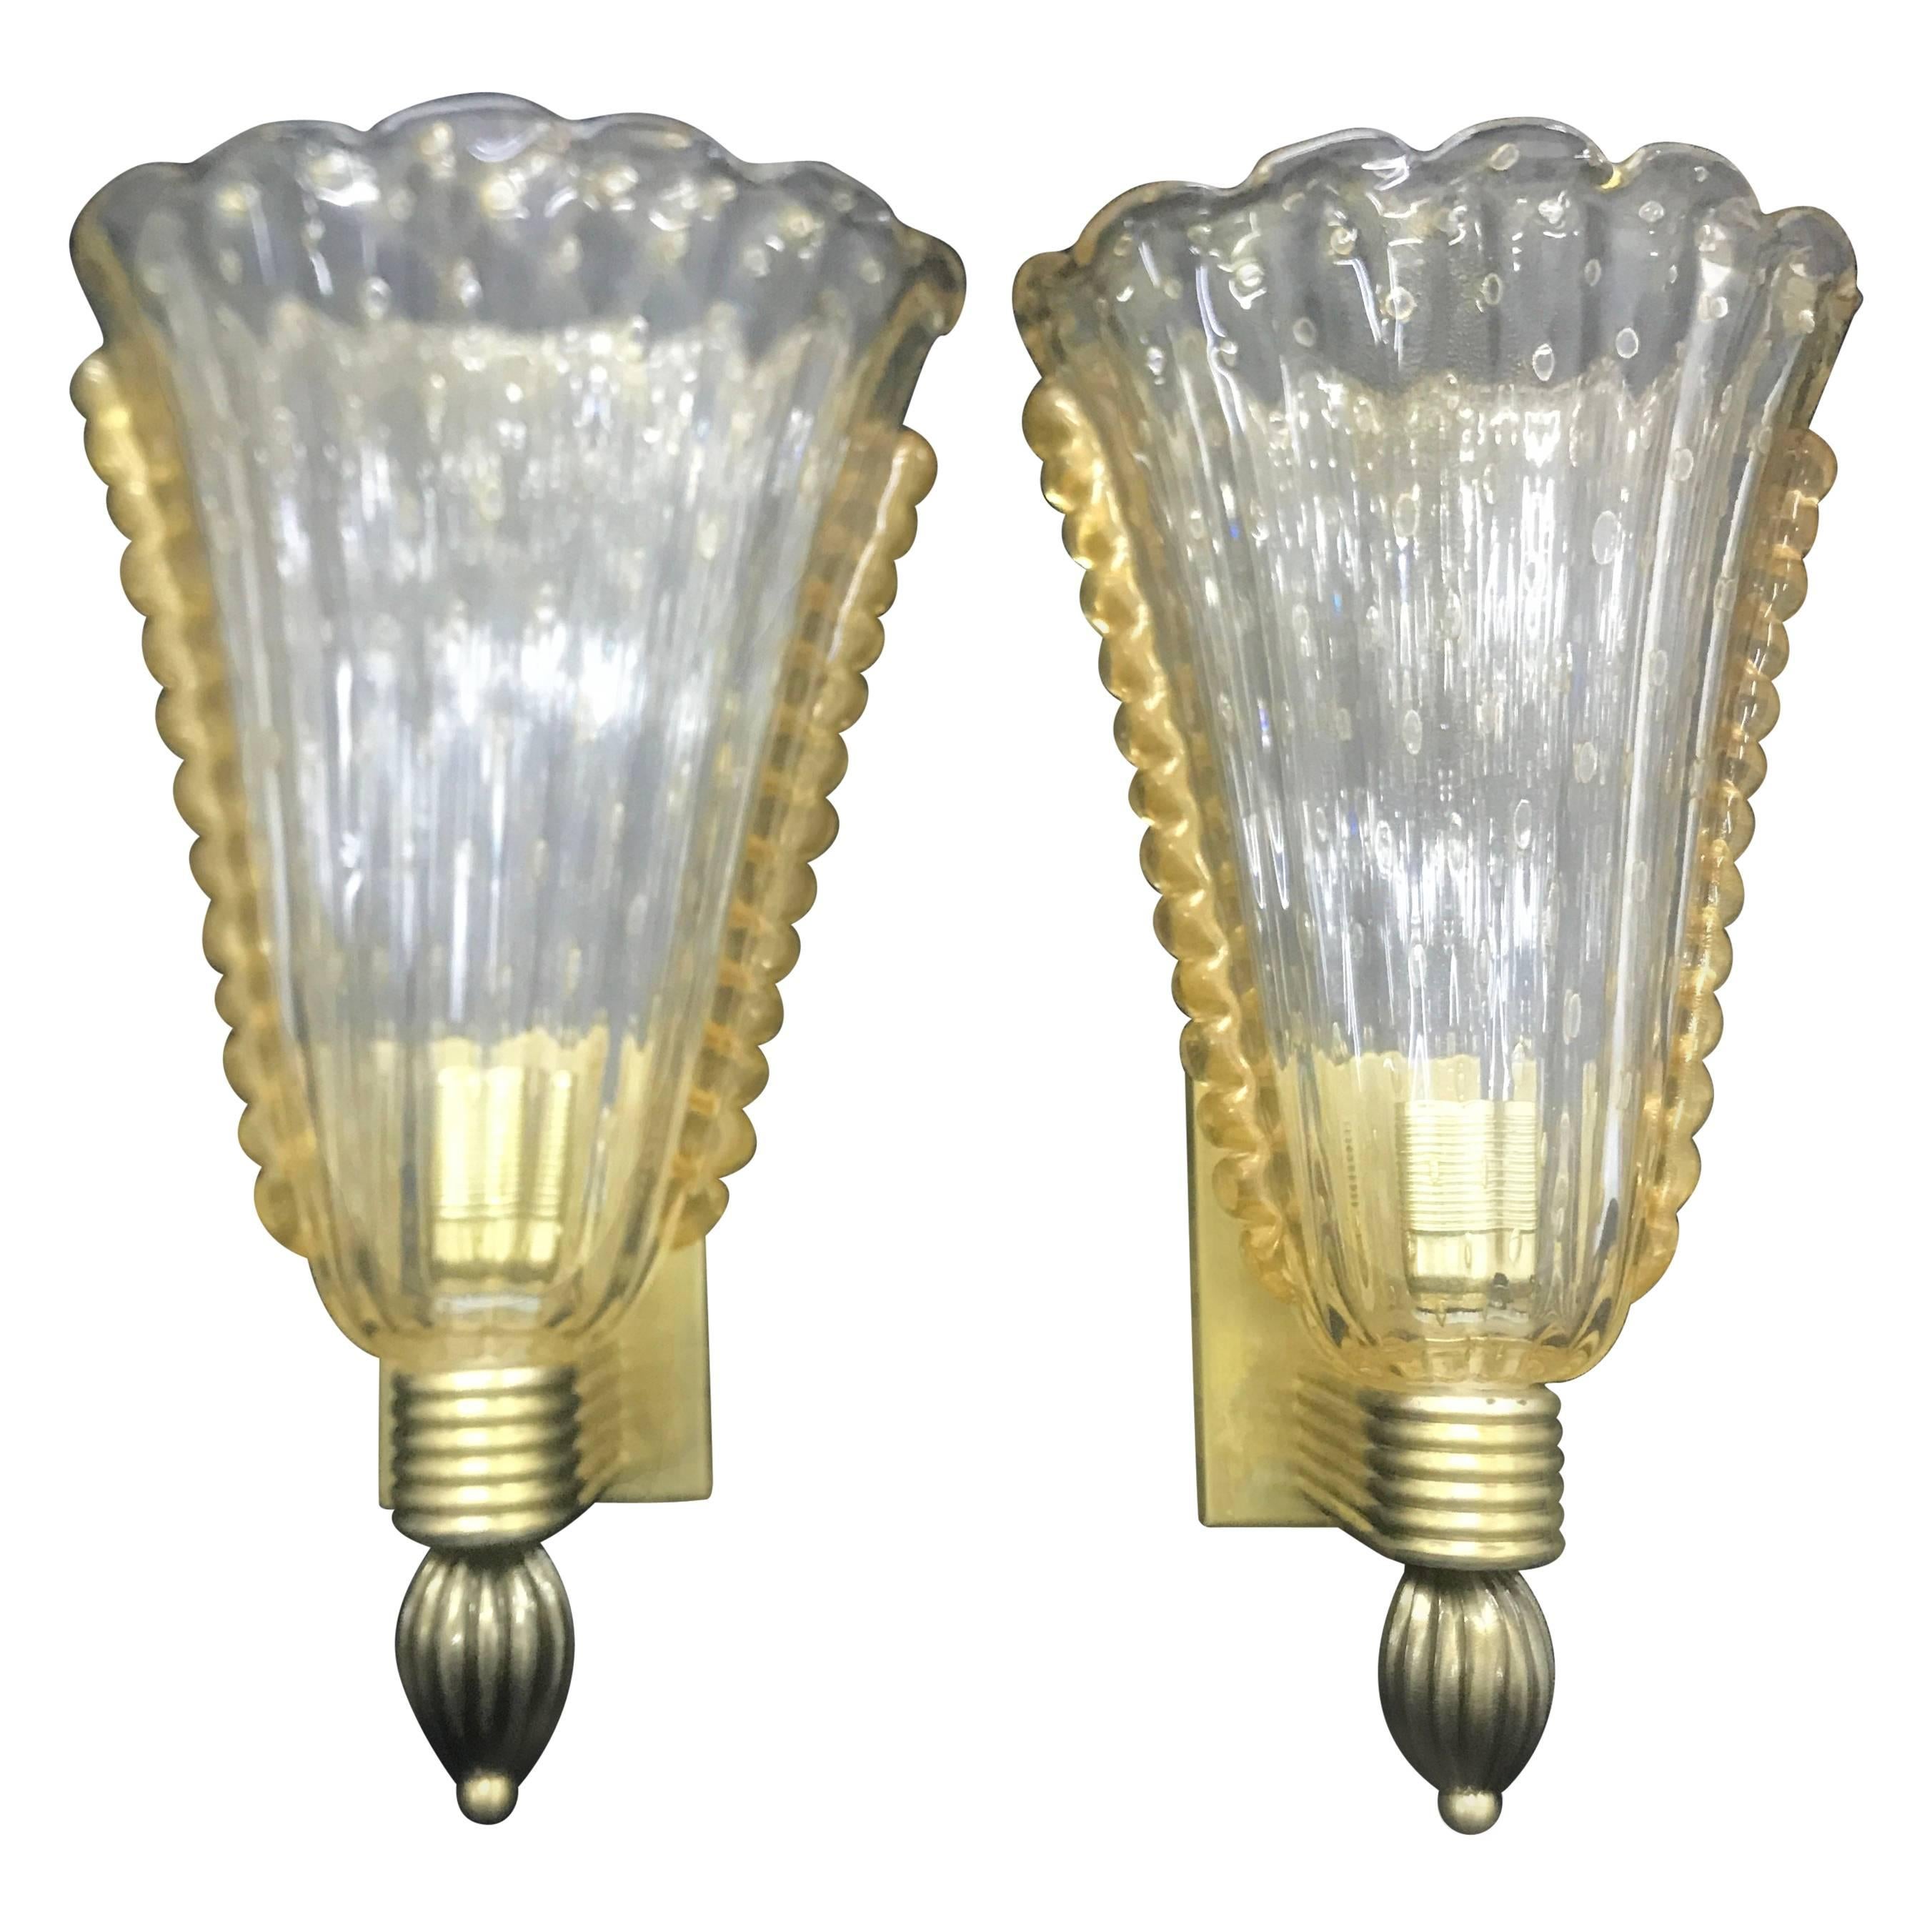 Vintage Pair of Murano Glass and Brass Wall Sconces, circa 1950